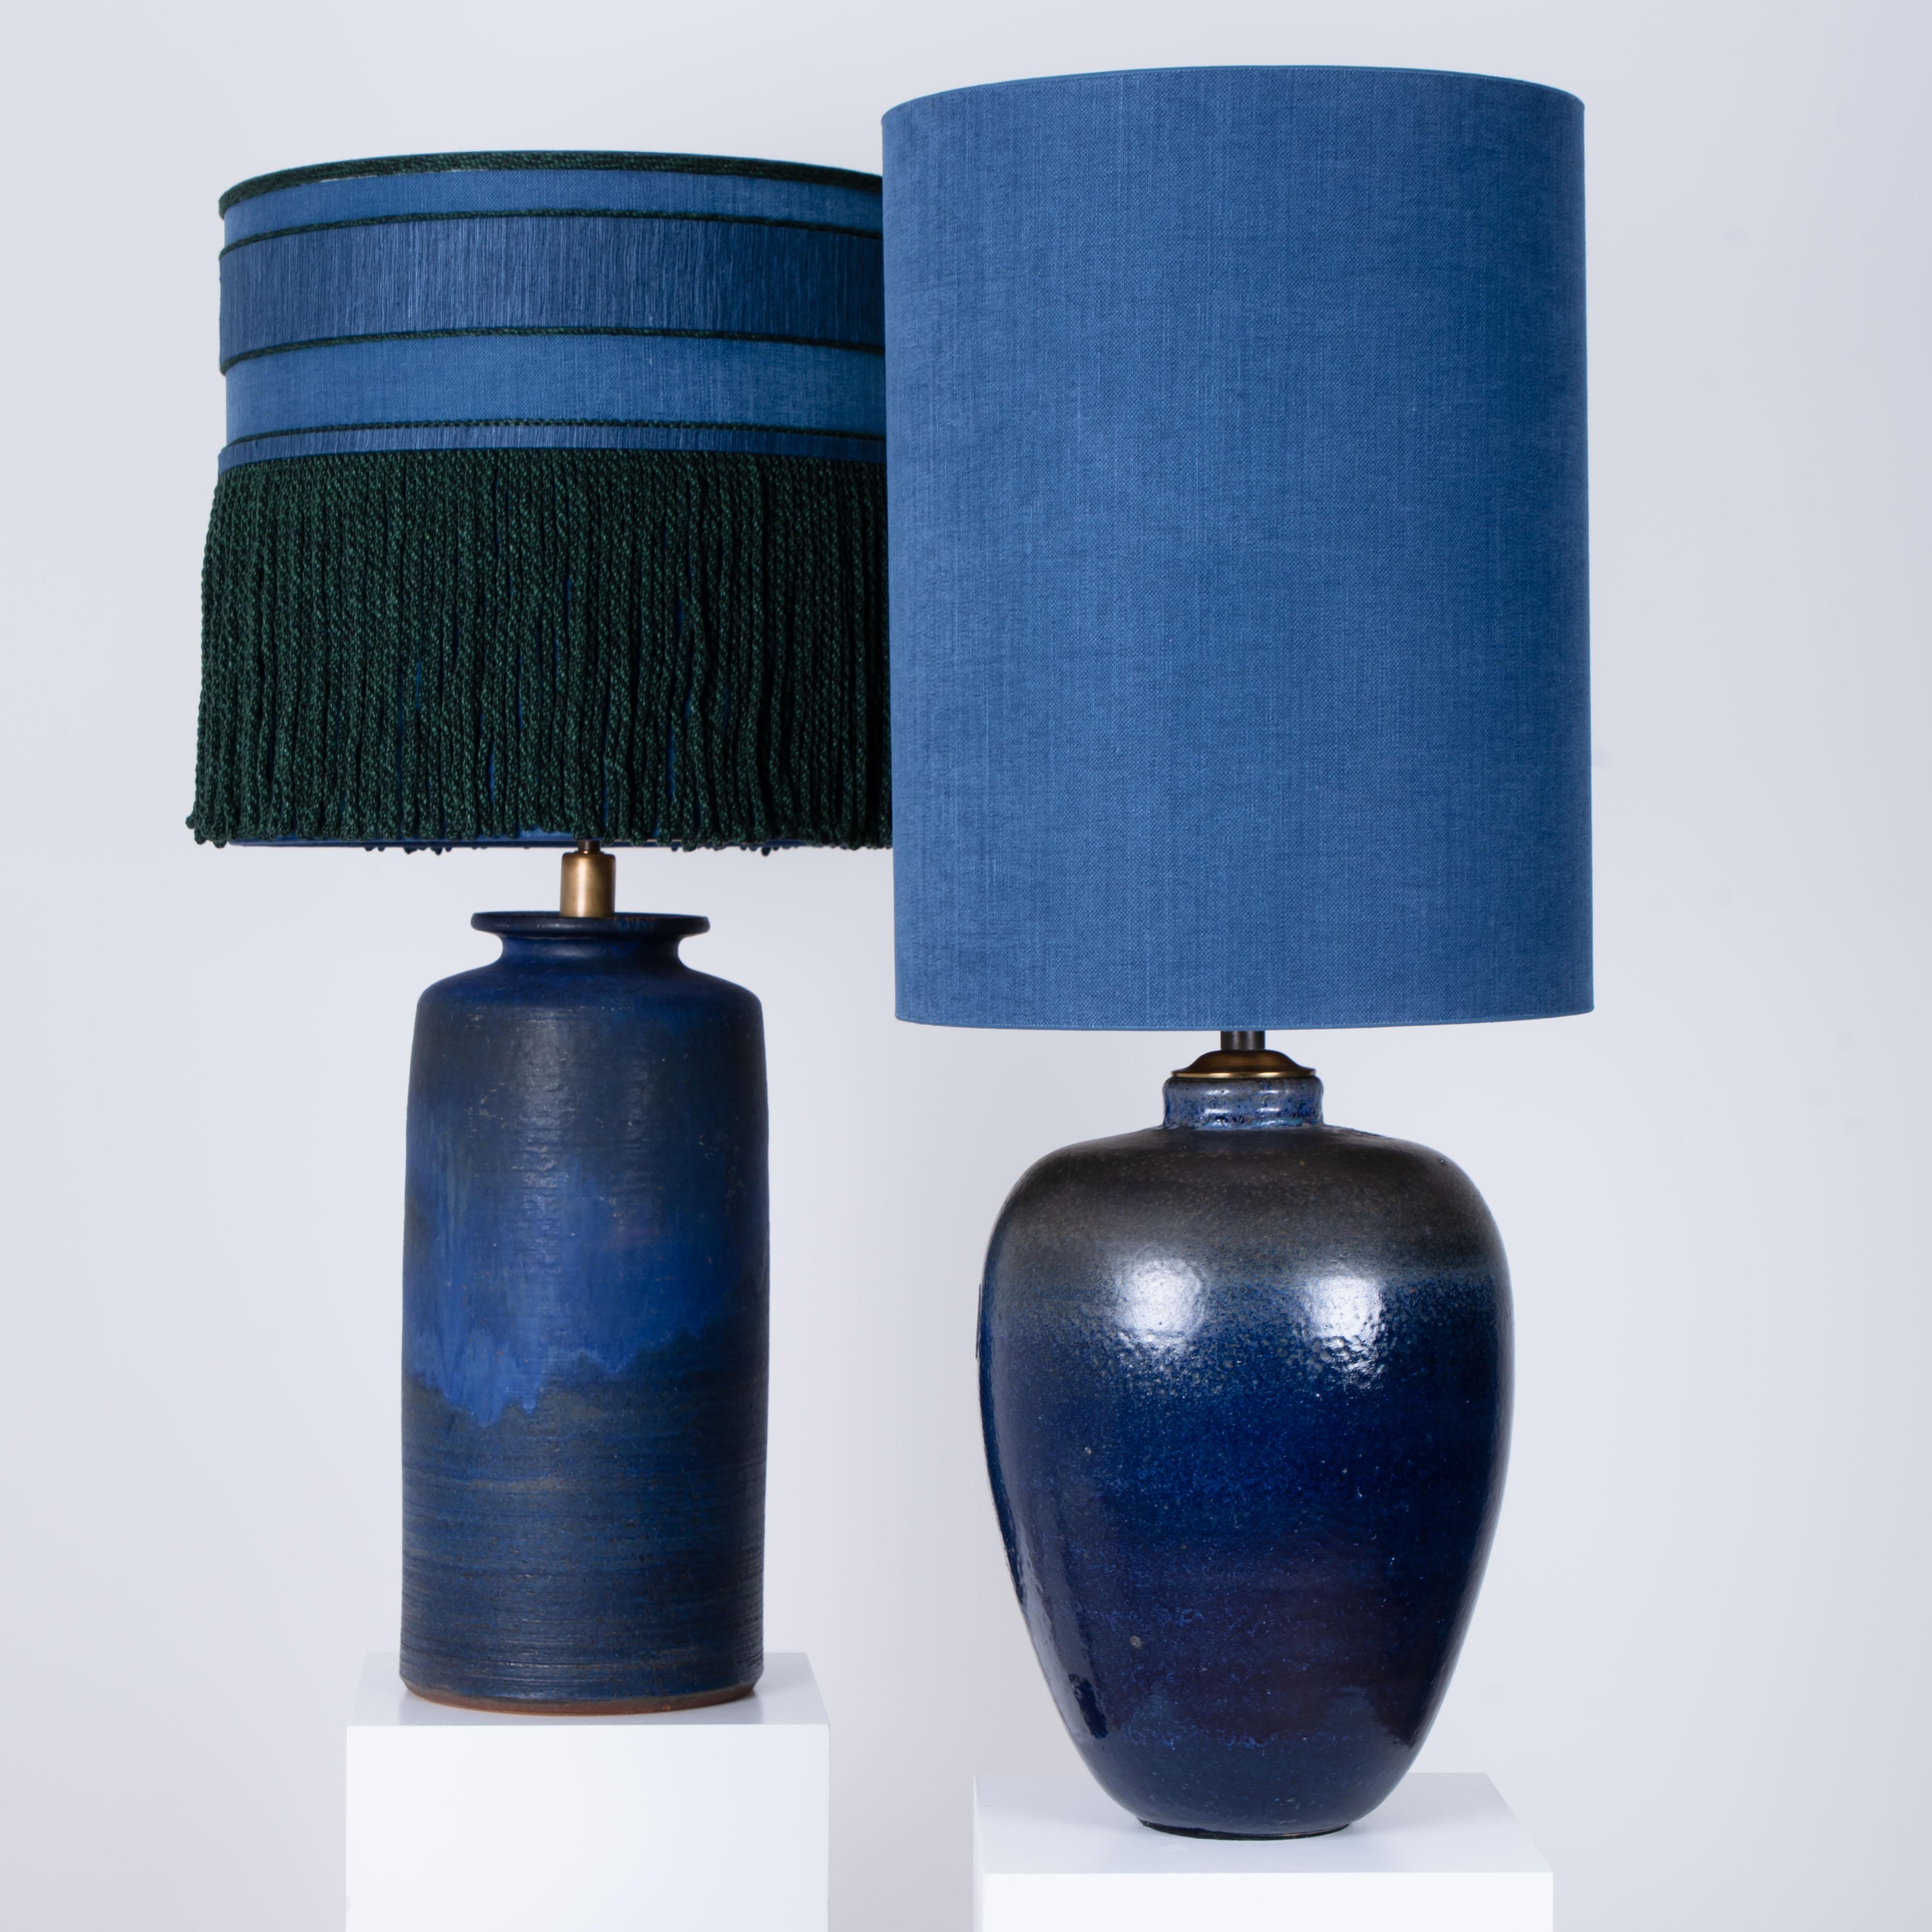 An exceptional pair of high-end ceramic table lamps, Denmark, 1960s. Sculptural pieces, made of handmade ceramic in blue tones. With a combination of glazed and with new custom made silk lamp shades by René Houben. With warm bronze or gold inner,